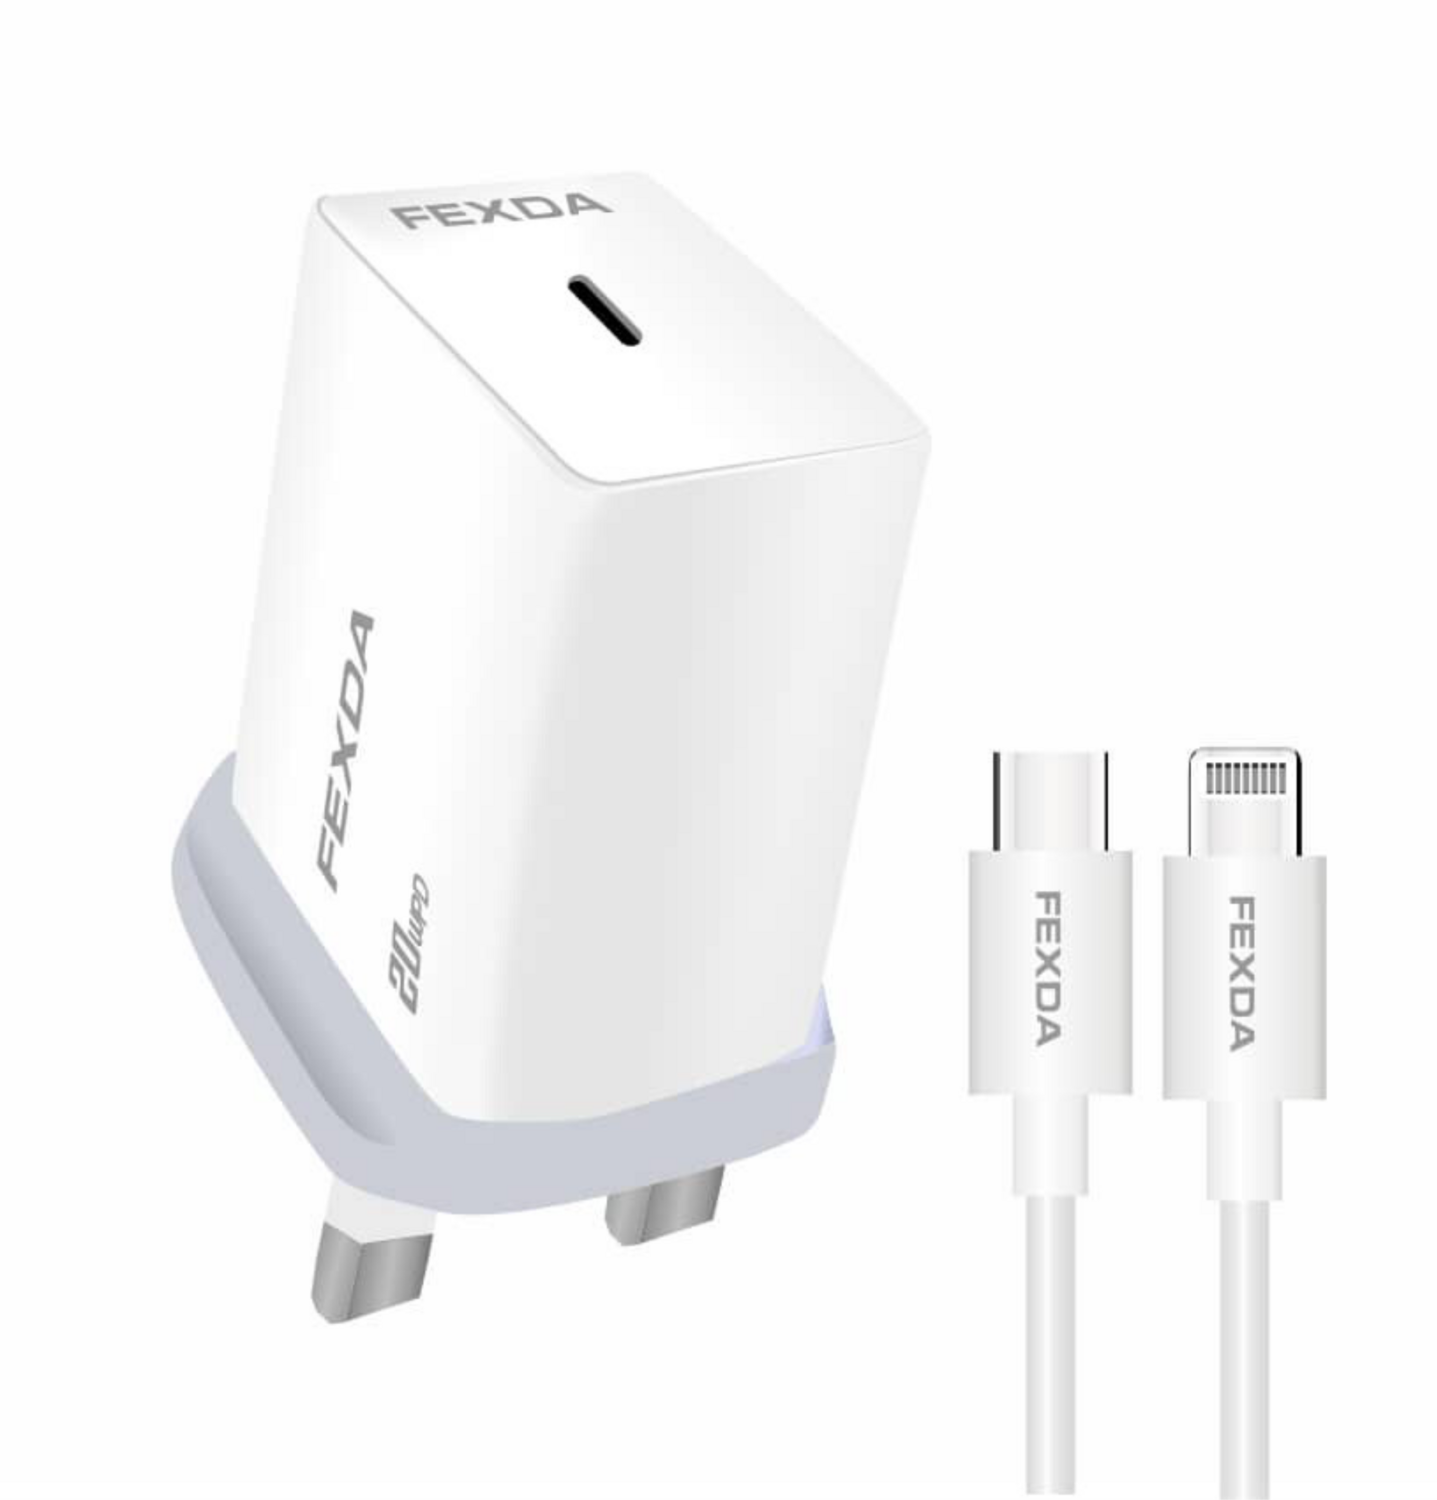 C2E PD 20W USB-C Fast Charger
& 30W USB-C to Lighting Cable